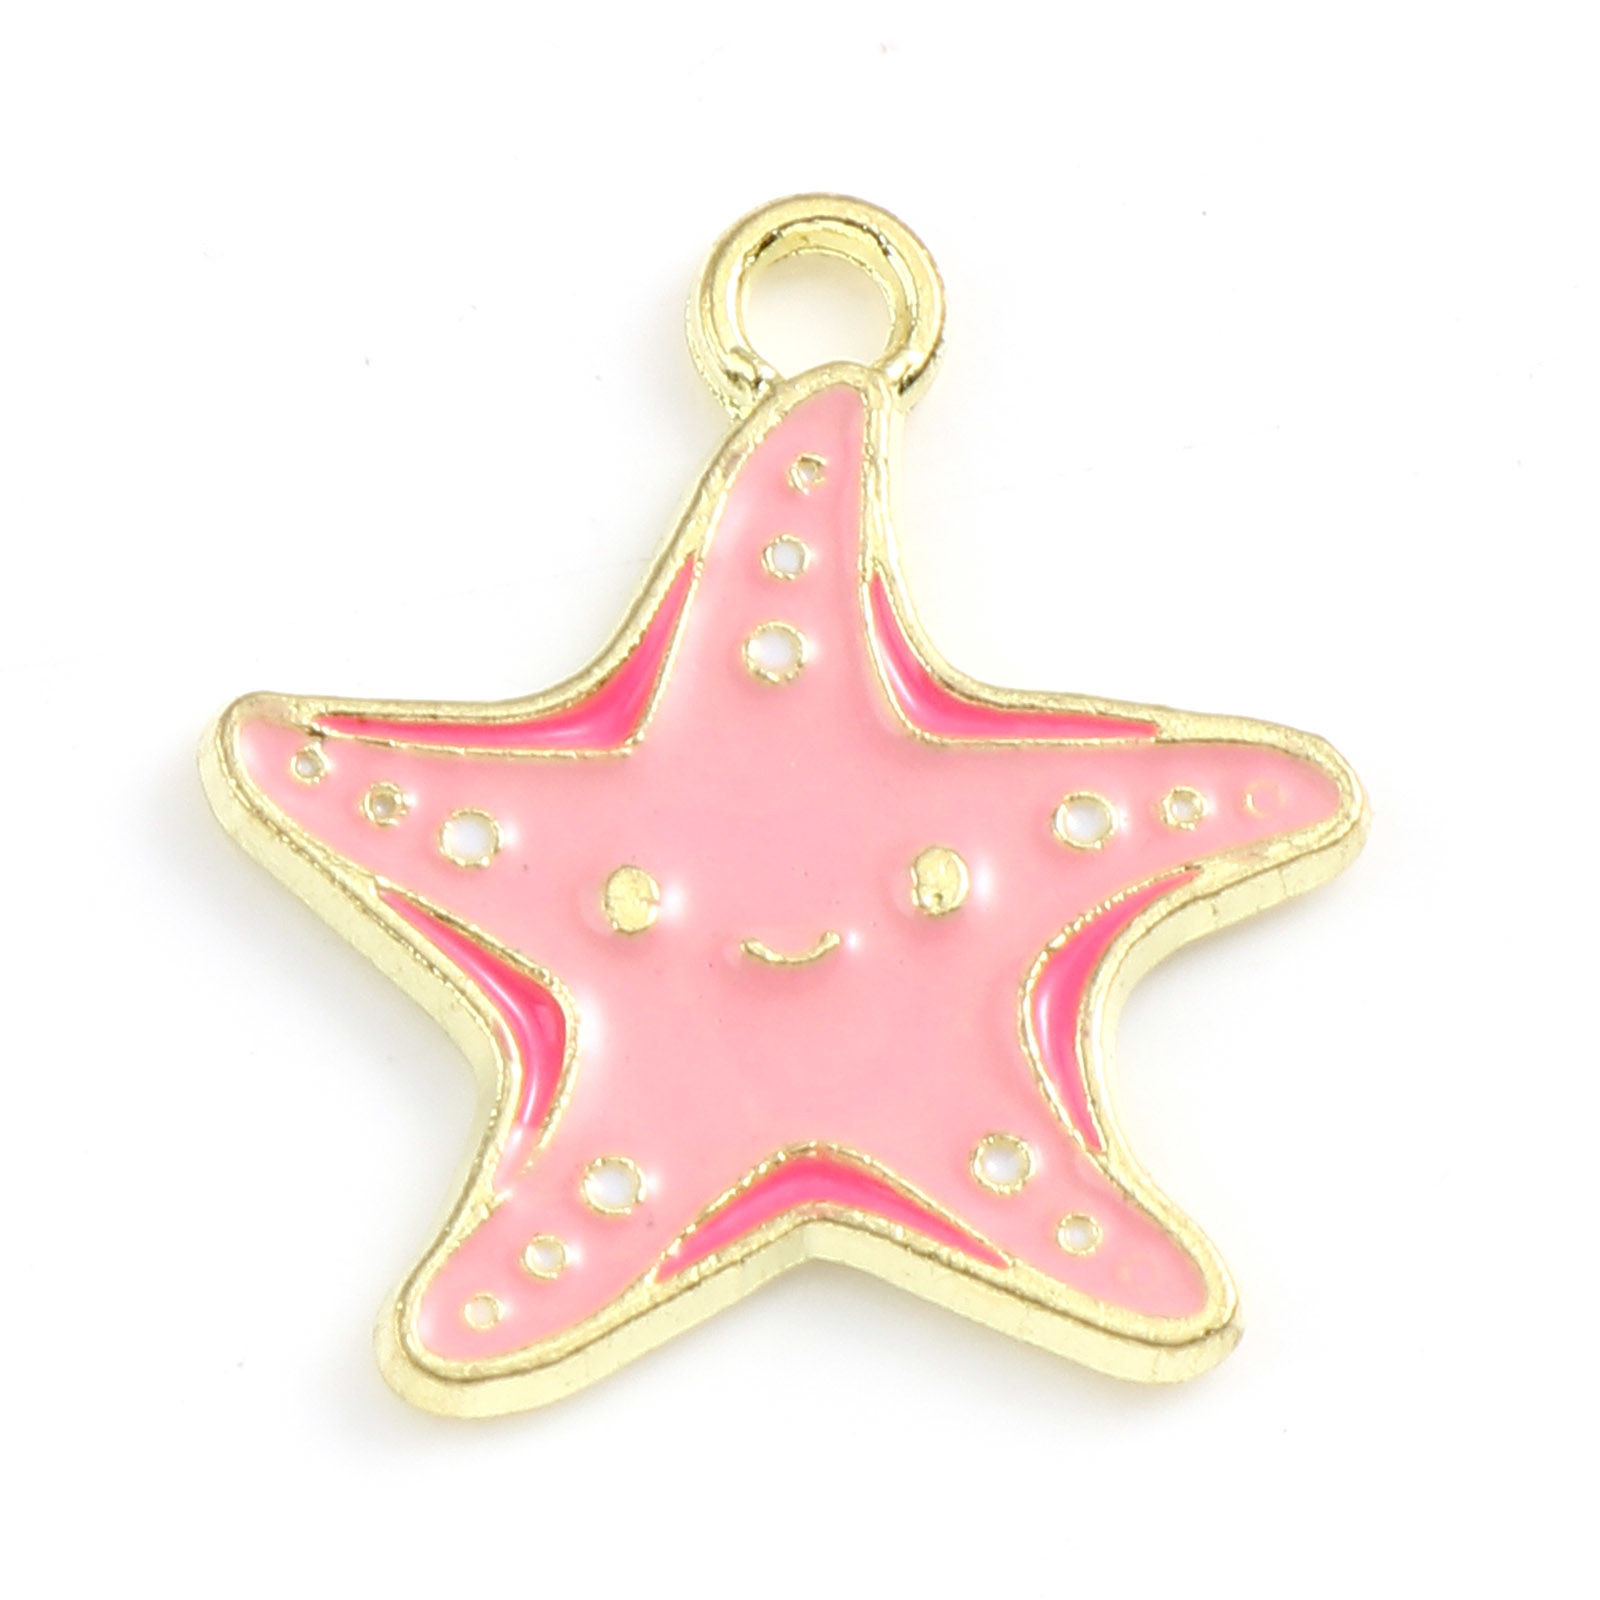 Picture of Zinc Based Alloy Ocean Jewelry Charms Star Fish Gold Plated Pink Enamel 19mm x 18mm, 20 PCs